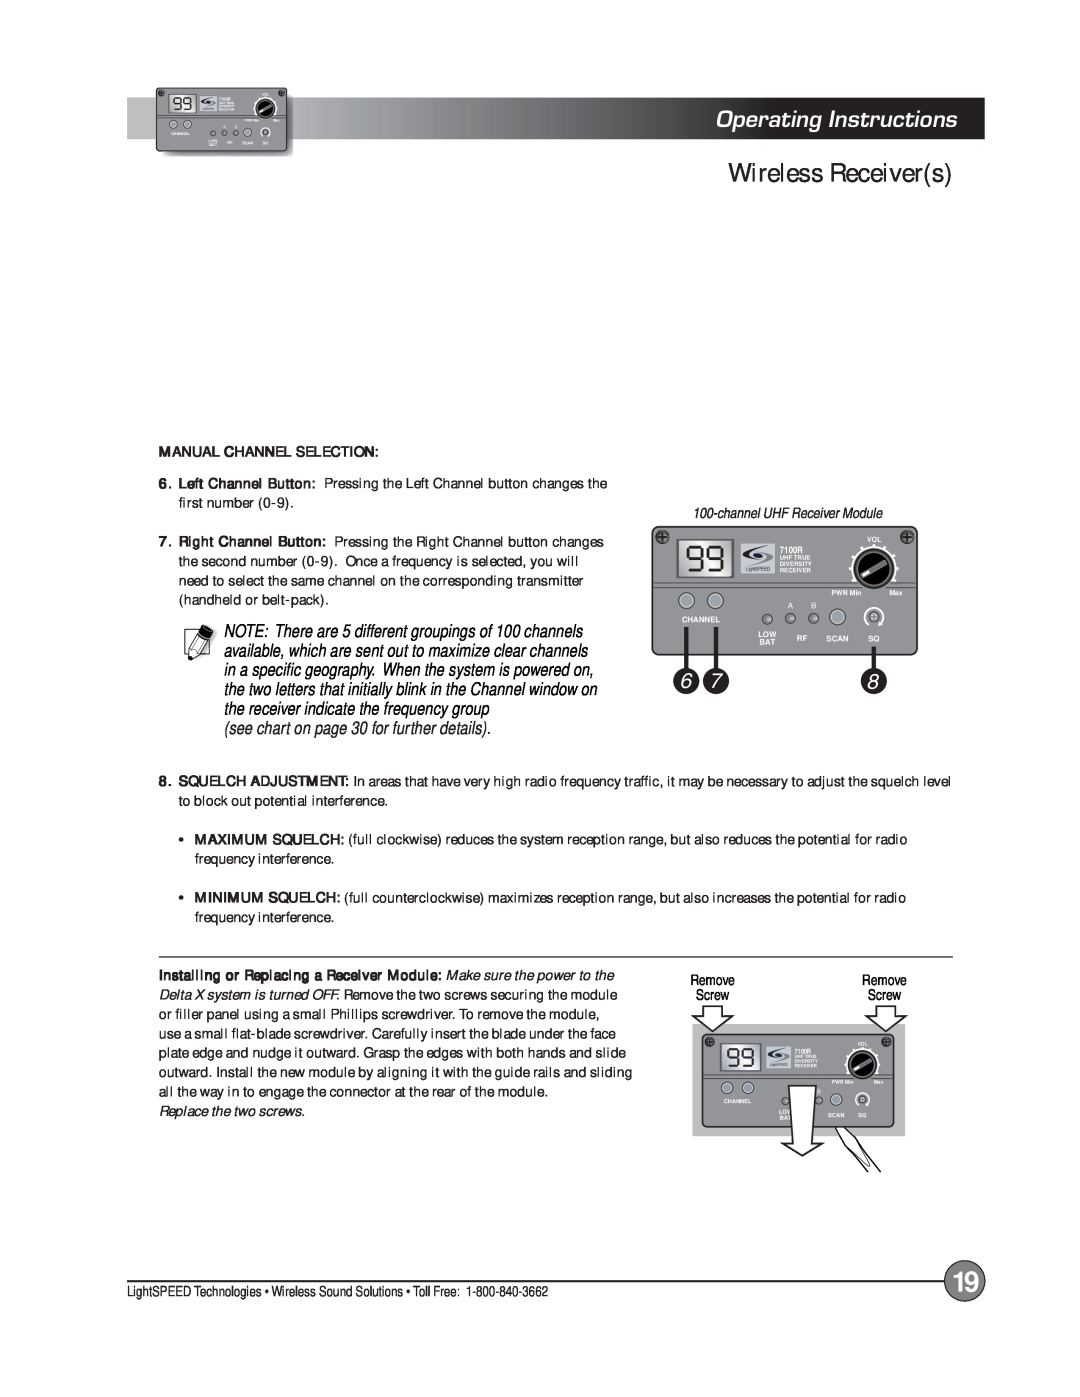 LightSpeed Technologies Delta X10, X12 manual Wireless Receivers, Operating Instructions, Manual Channel Selection 